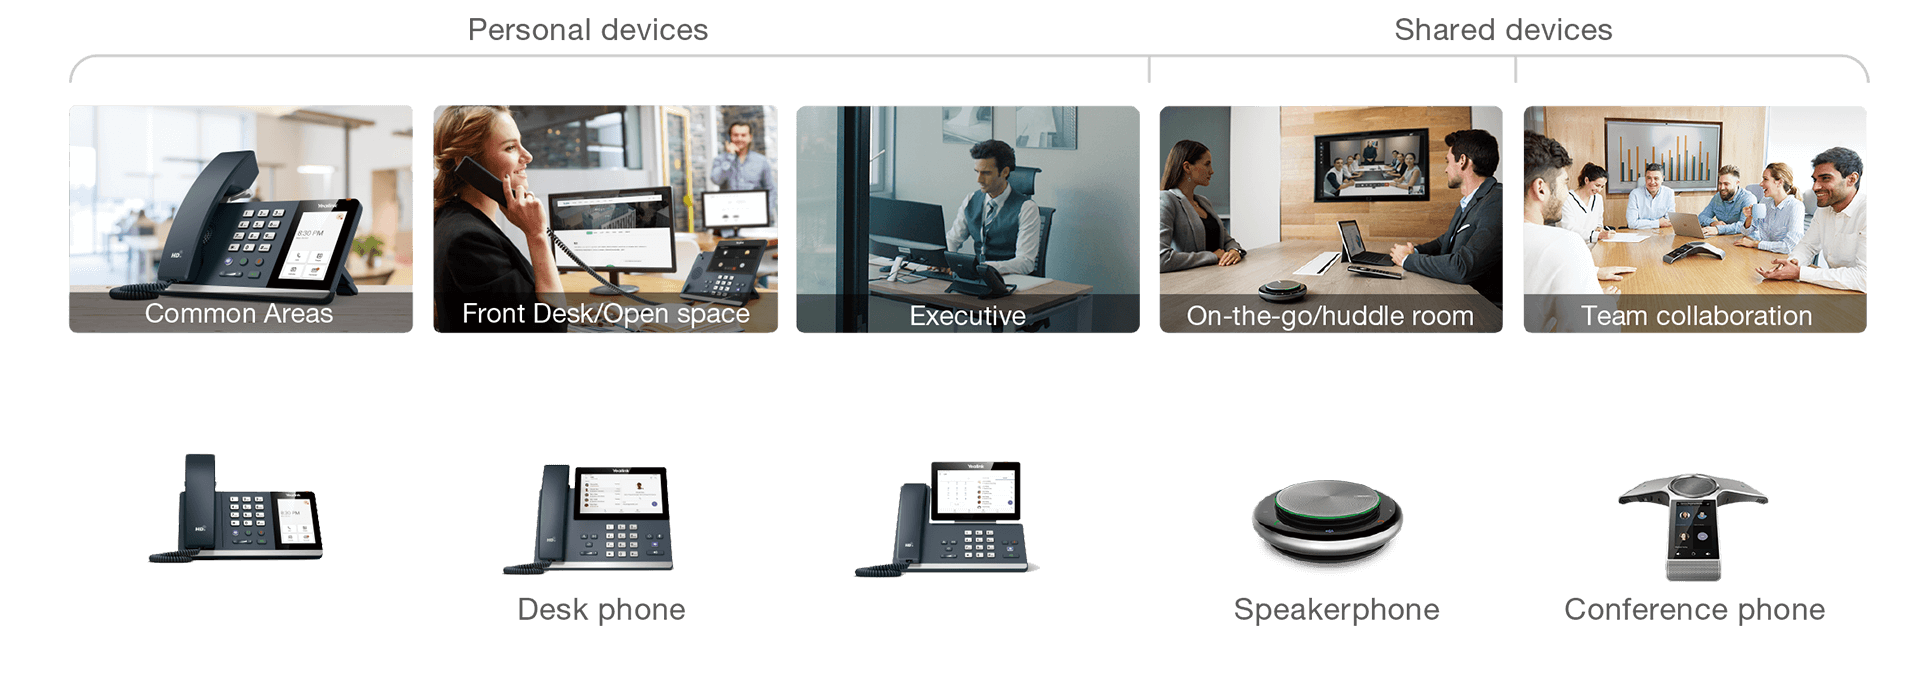 voip phone service,office phone systems for small business,small business phone systems,microsoft teams desk phone,voip  business phone service,how to use microsoft teams phone system